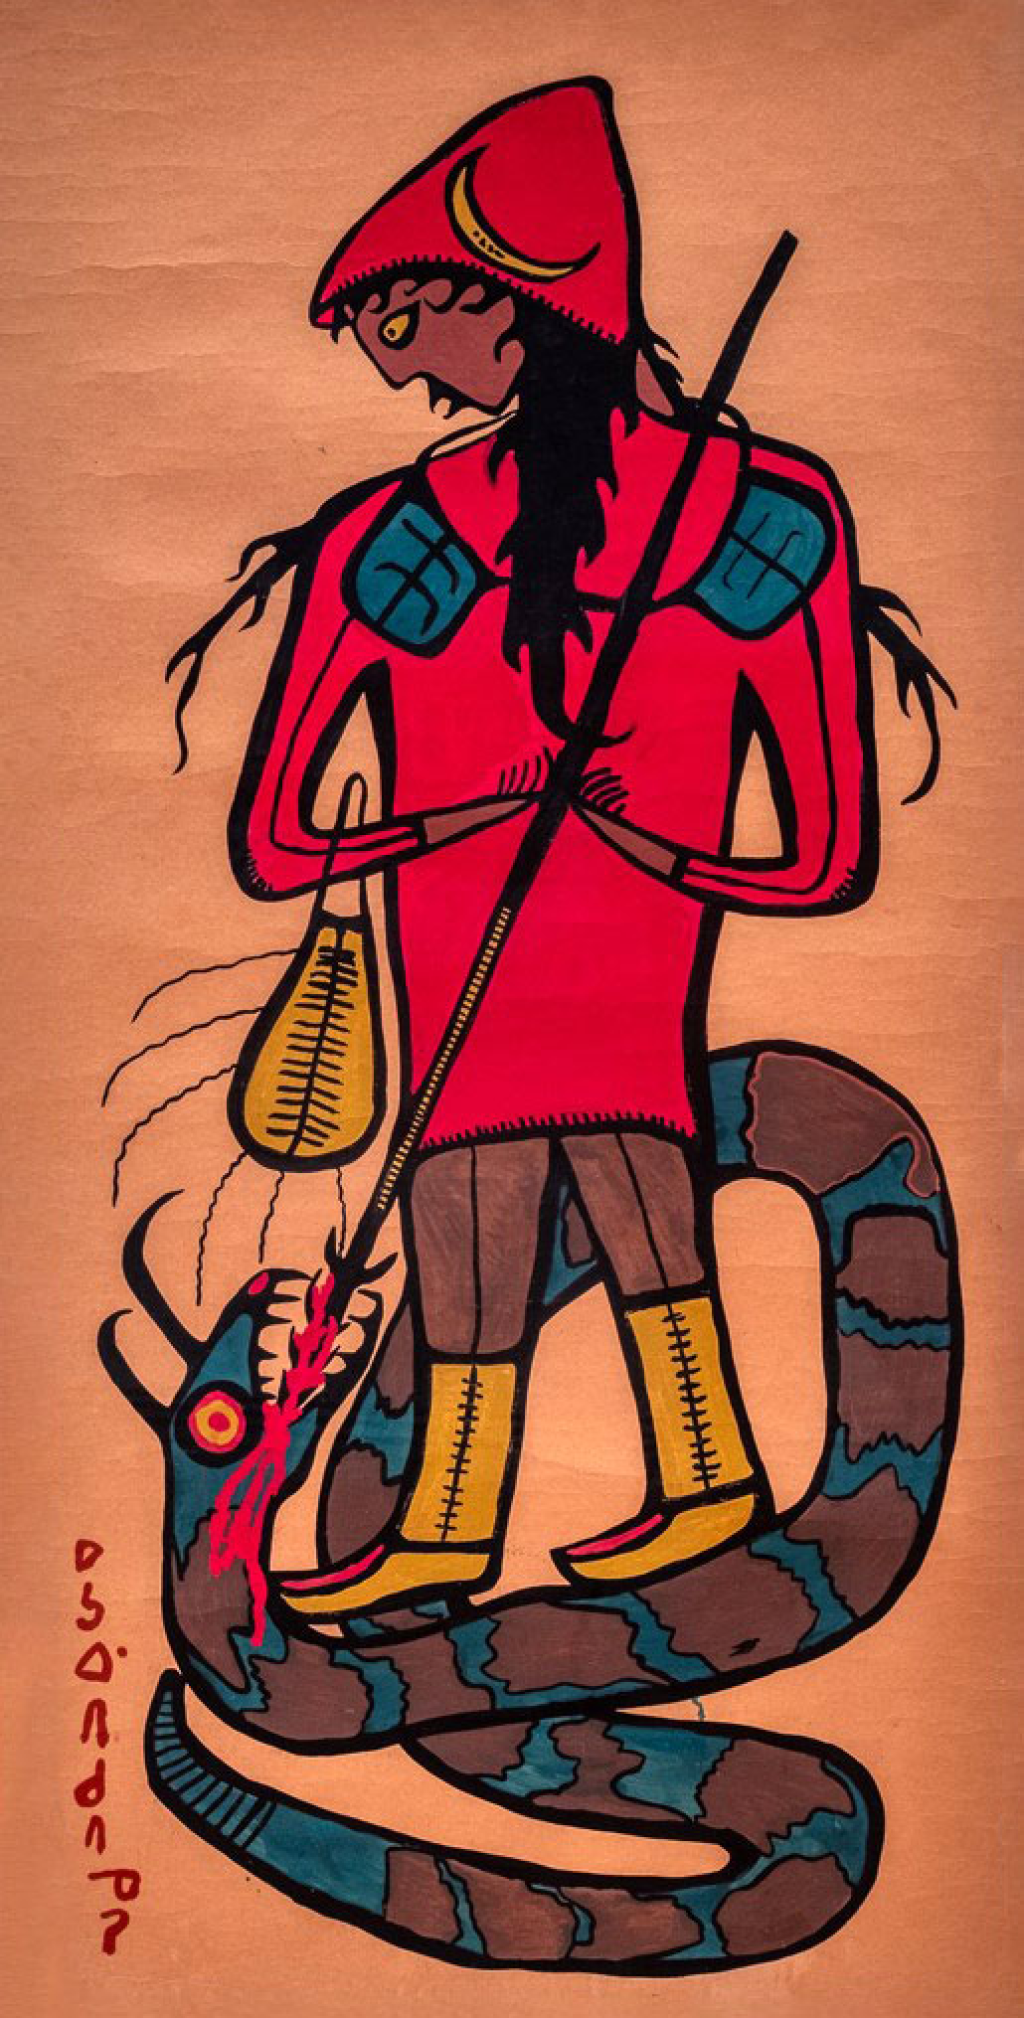 A painting of a shaman fighting a snake creature